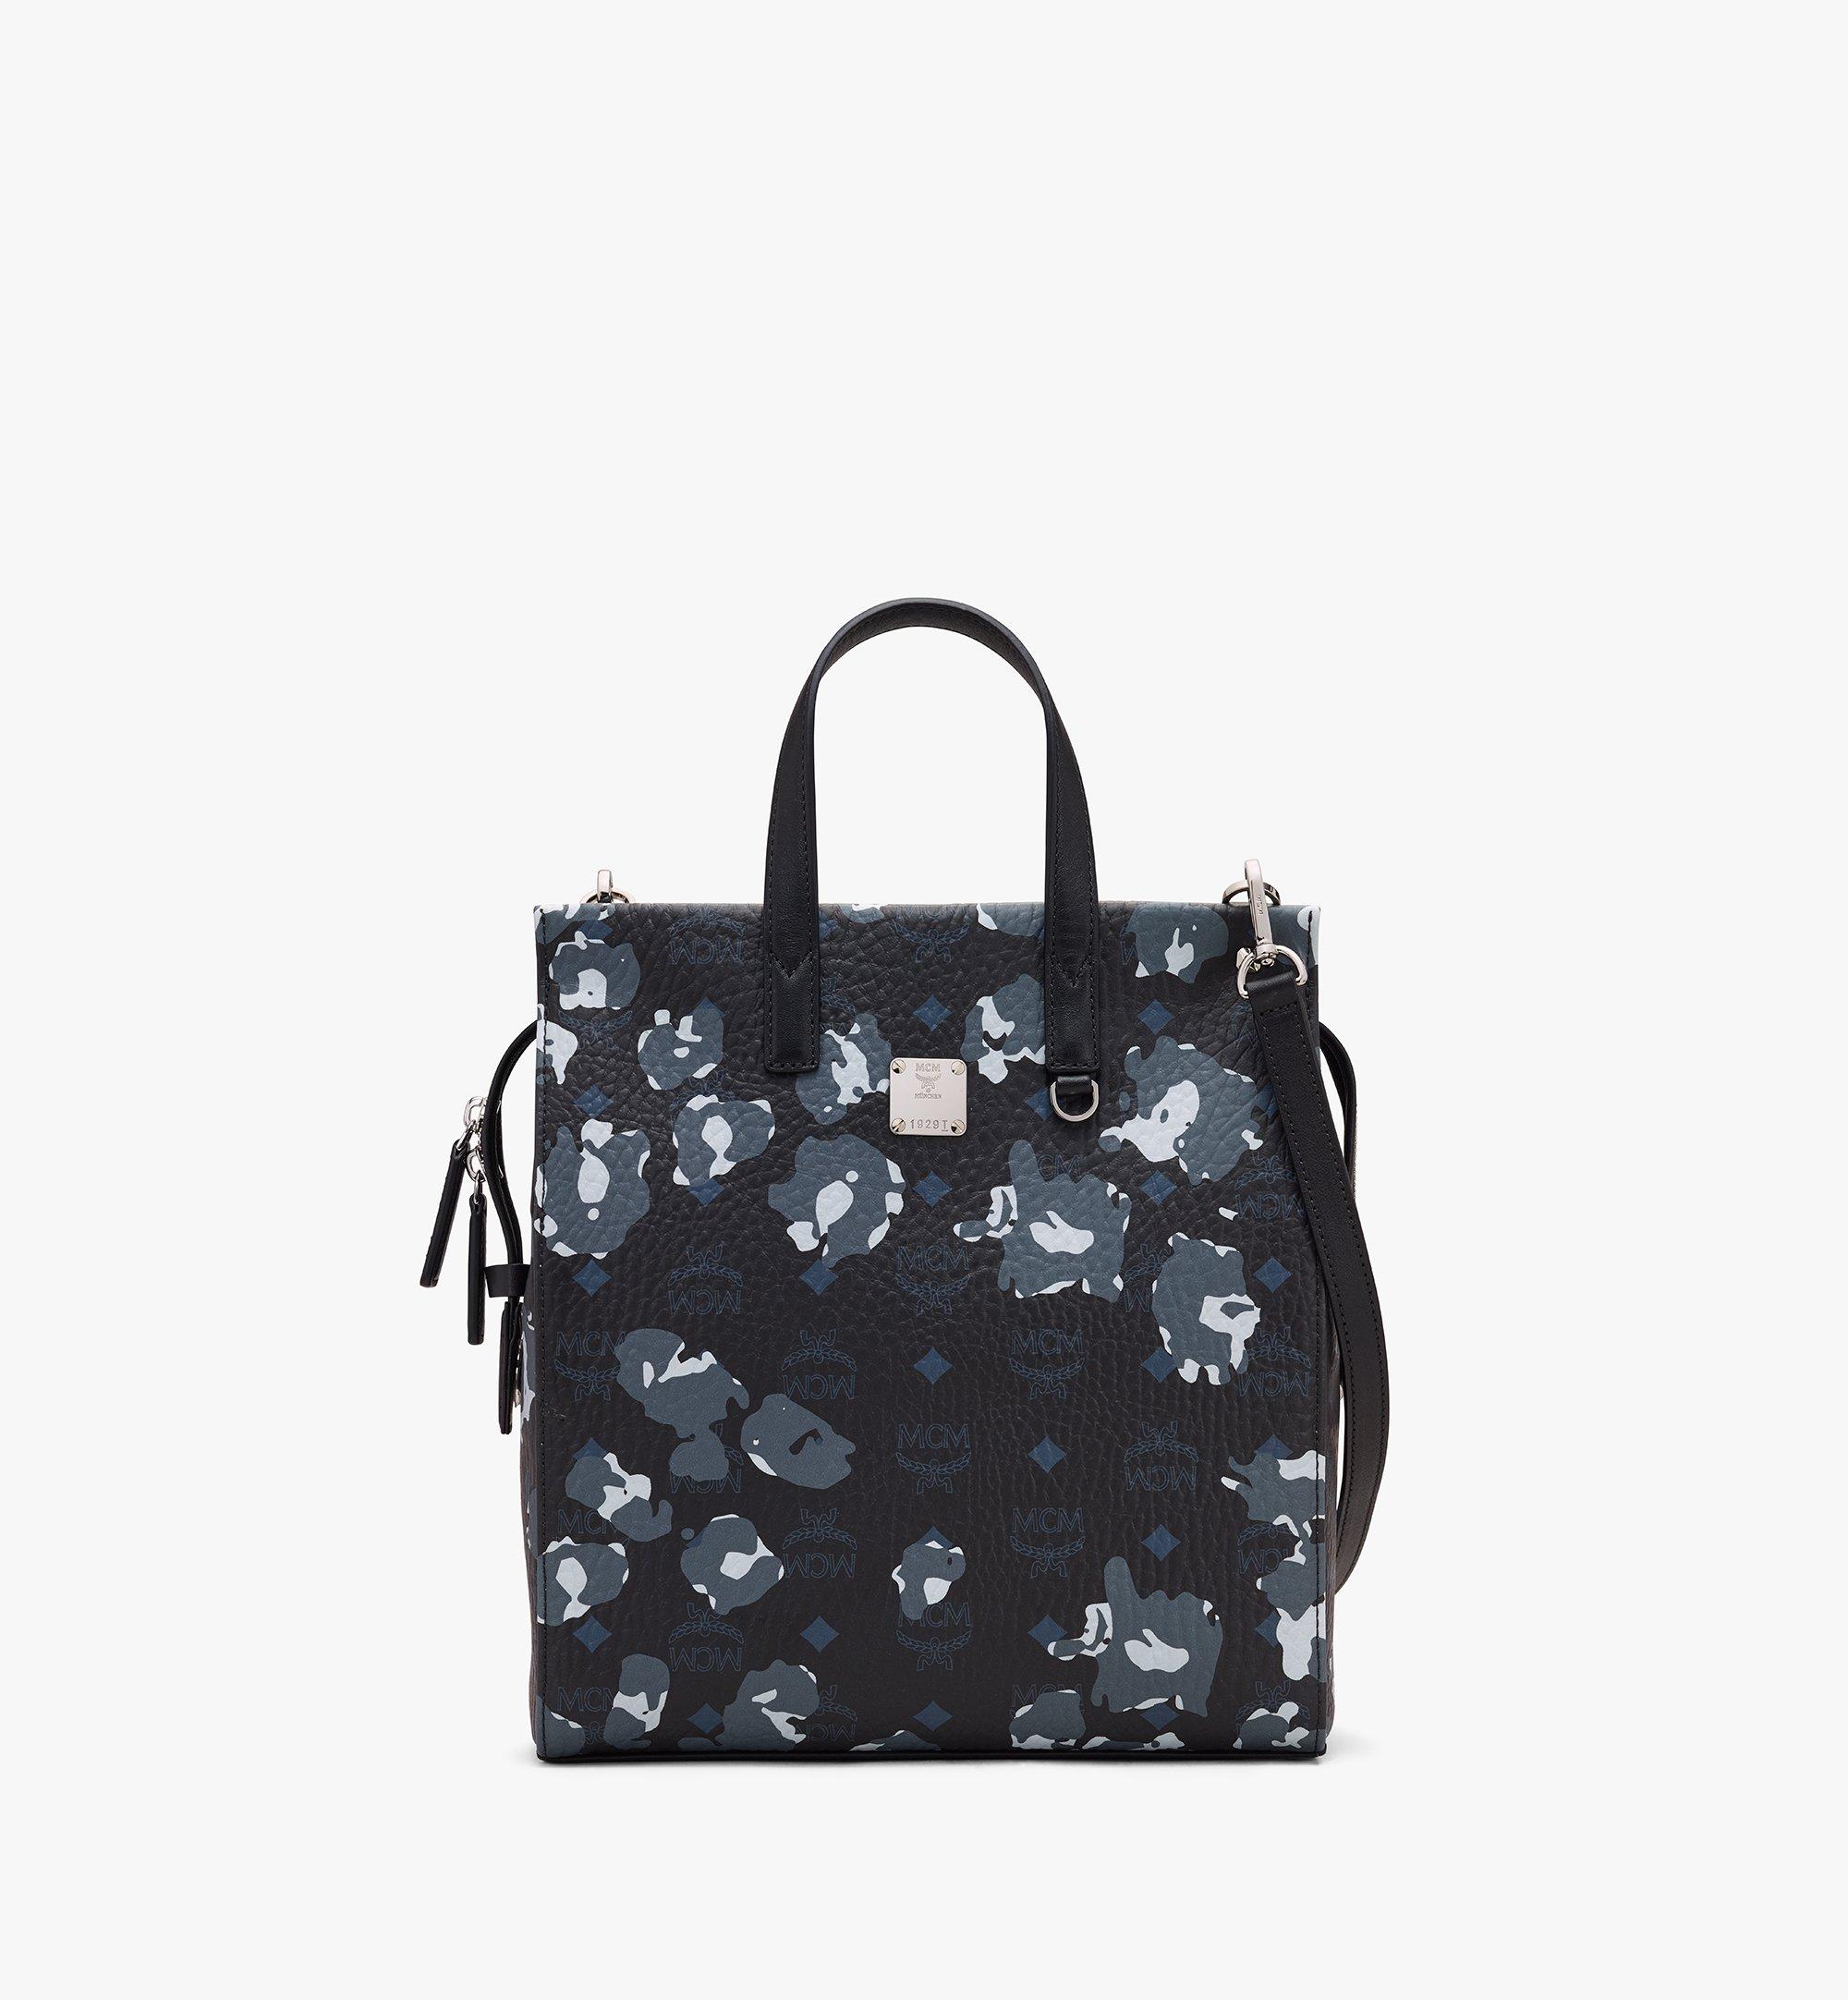 Men's Bags on Specials | Enjoy up to 40% off | MCM® LU